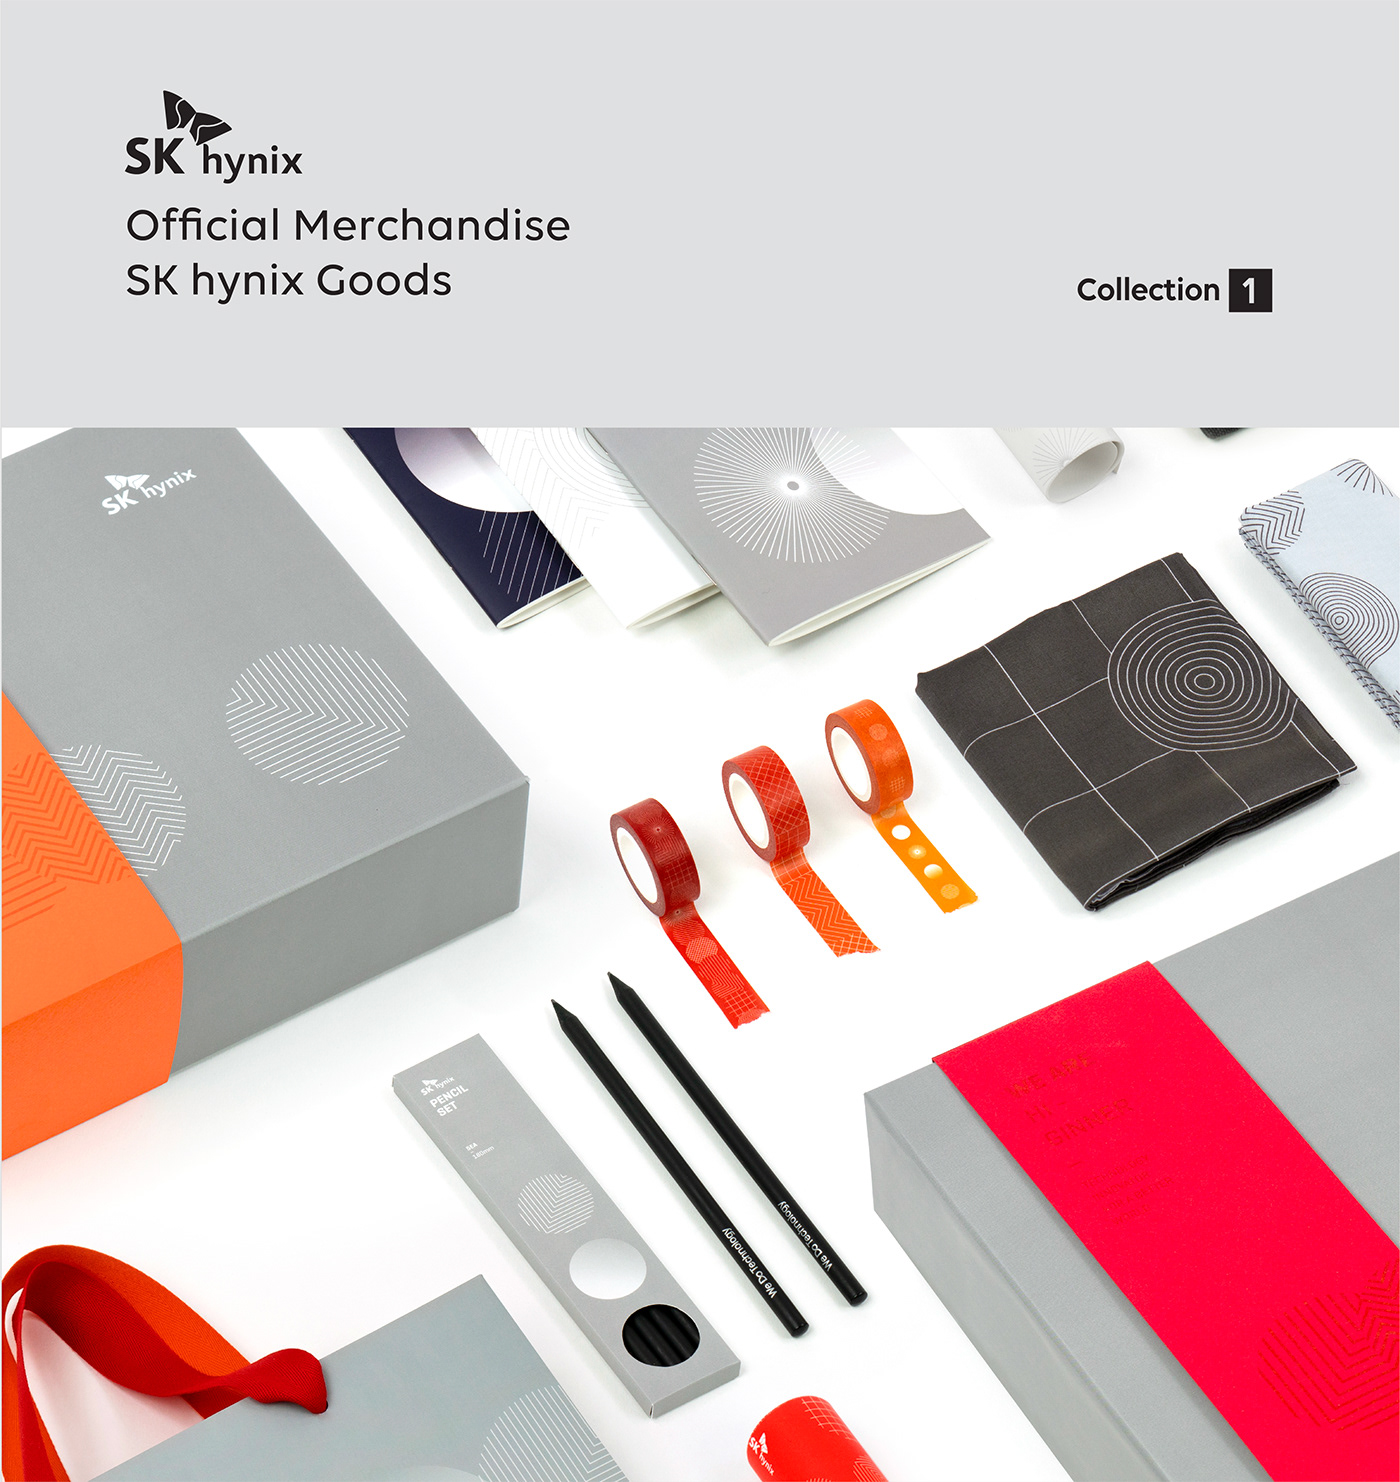 branding  Collection design graphic identity package SKhynix